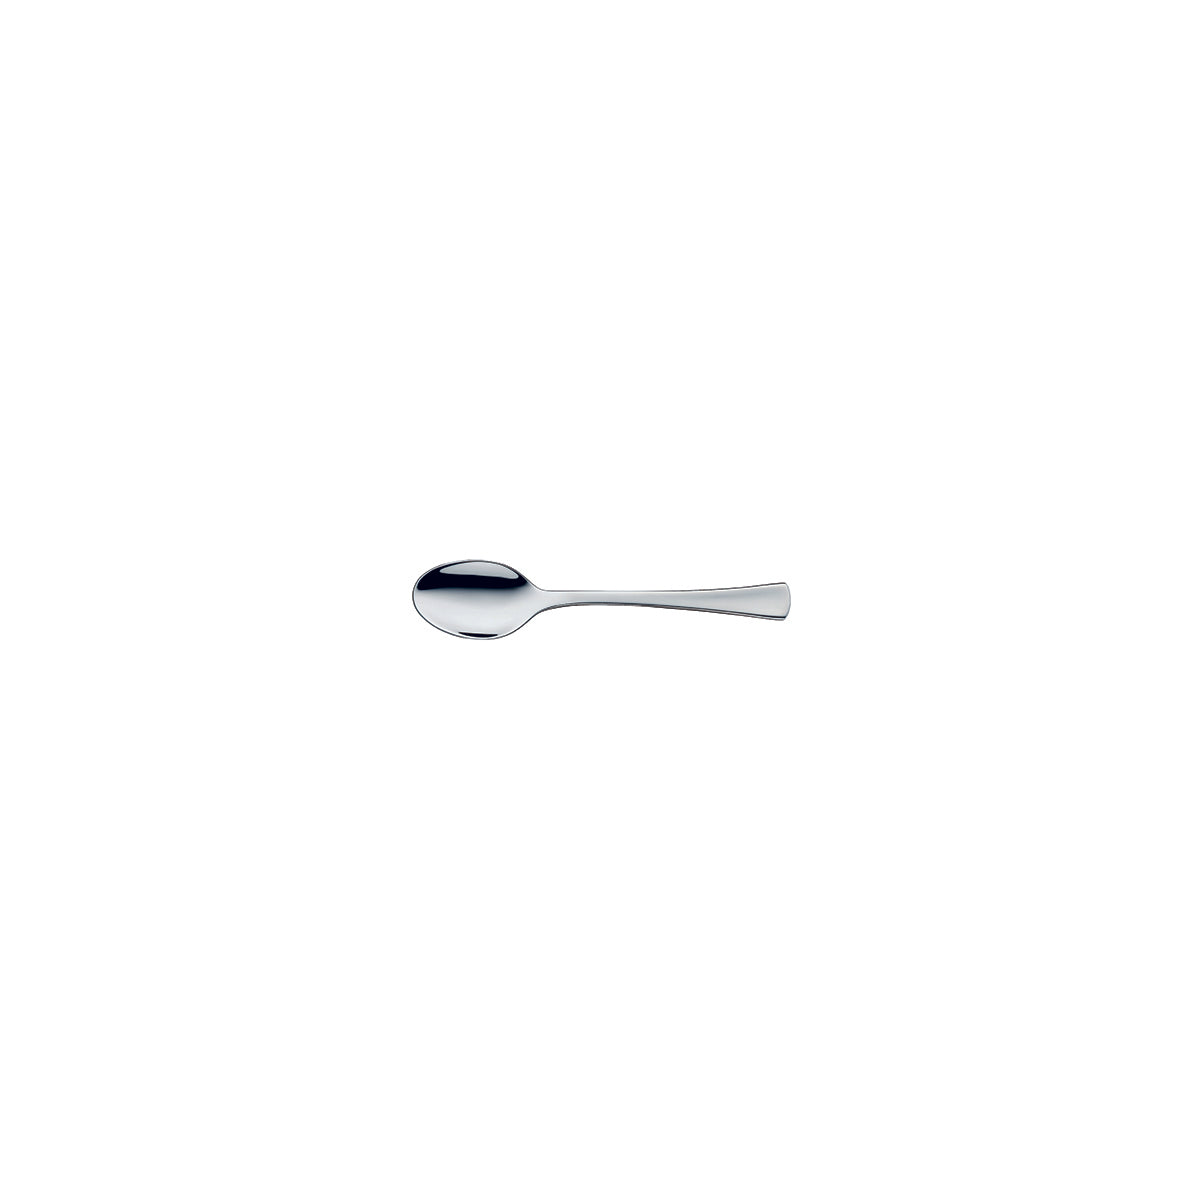 Gastro Coffee Spoon Stainless Steel